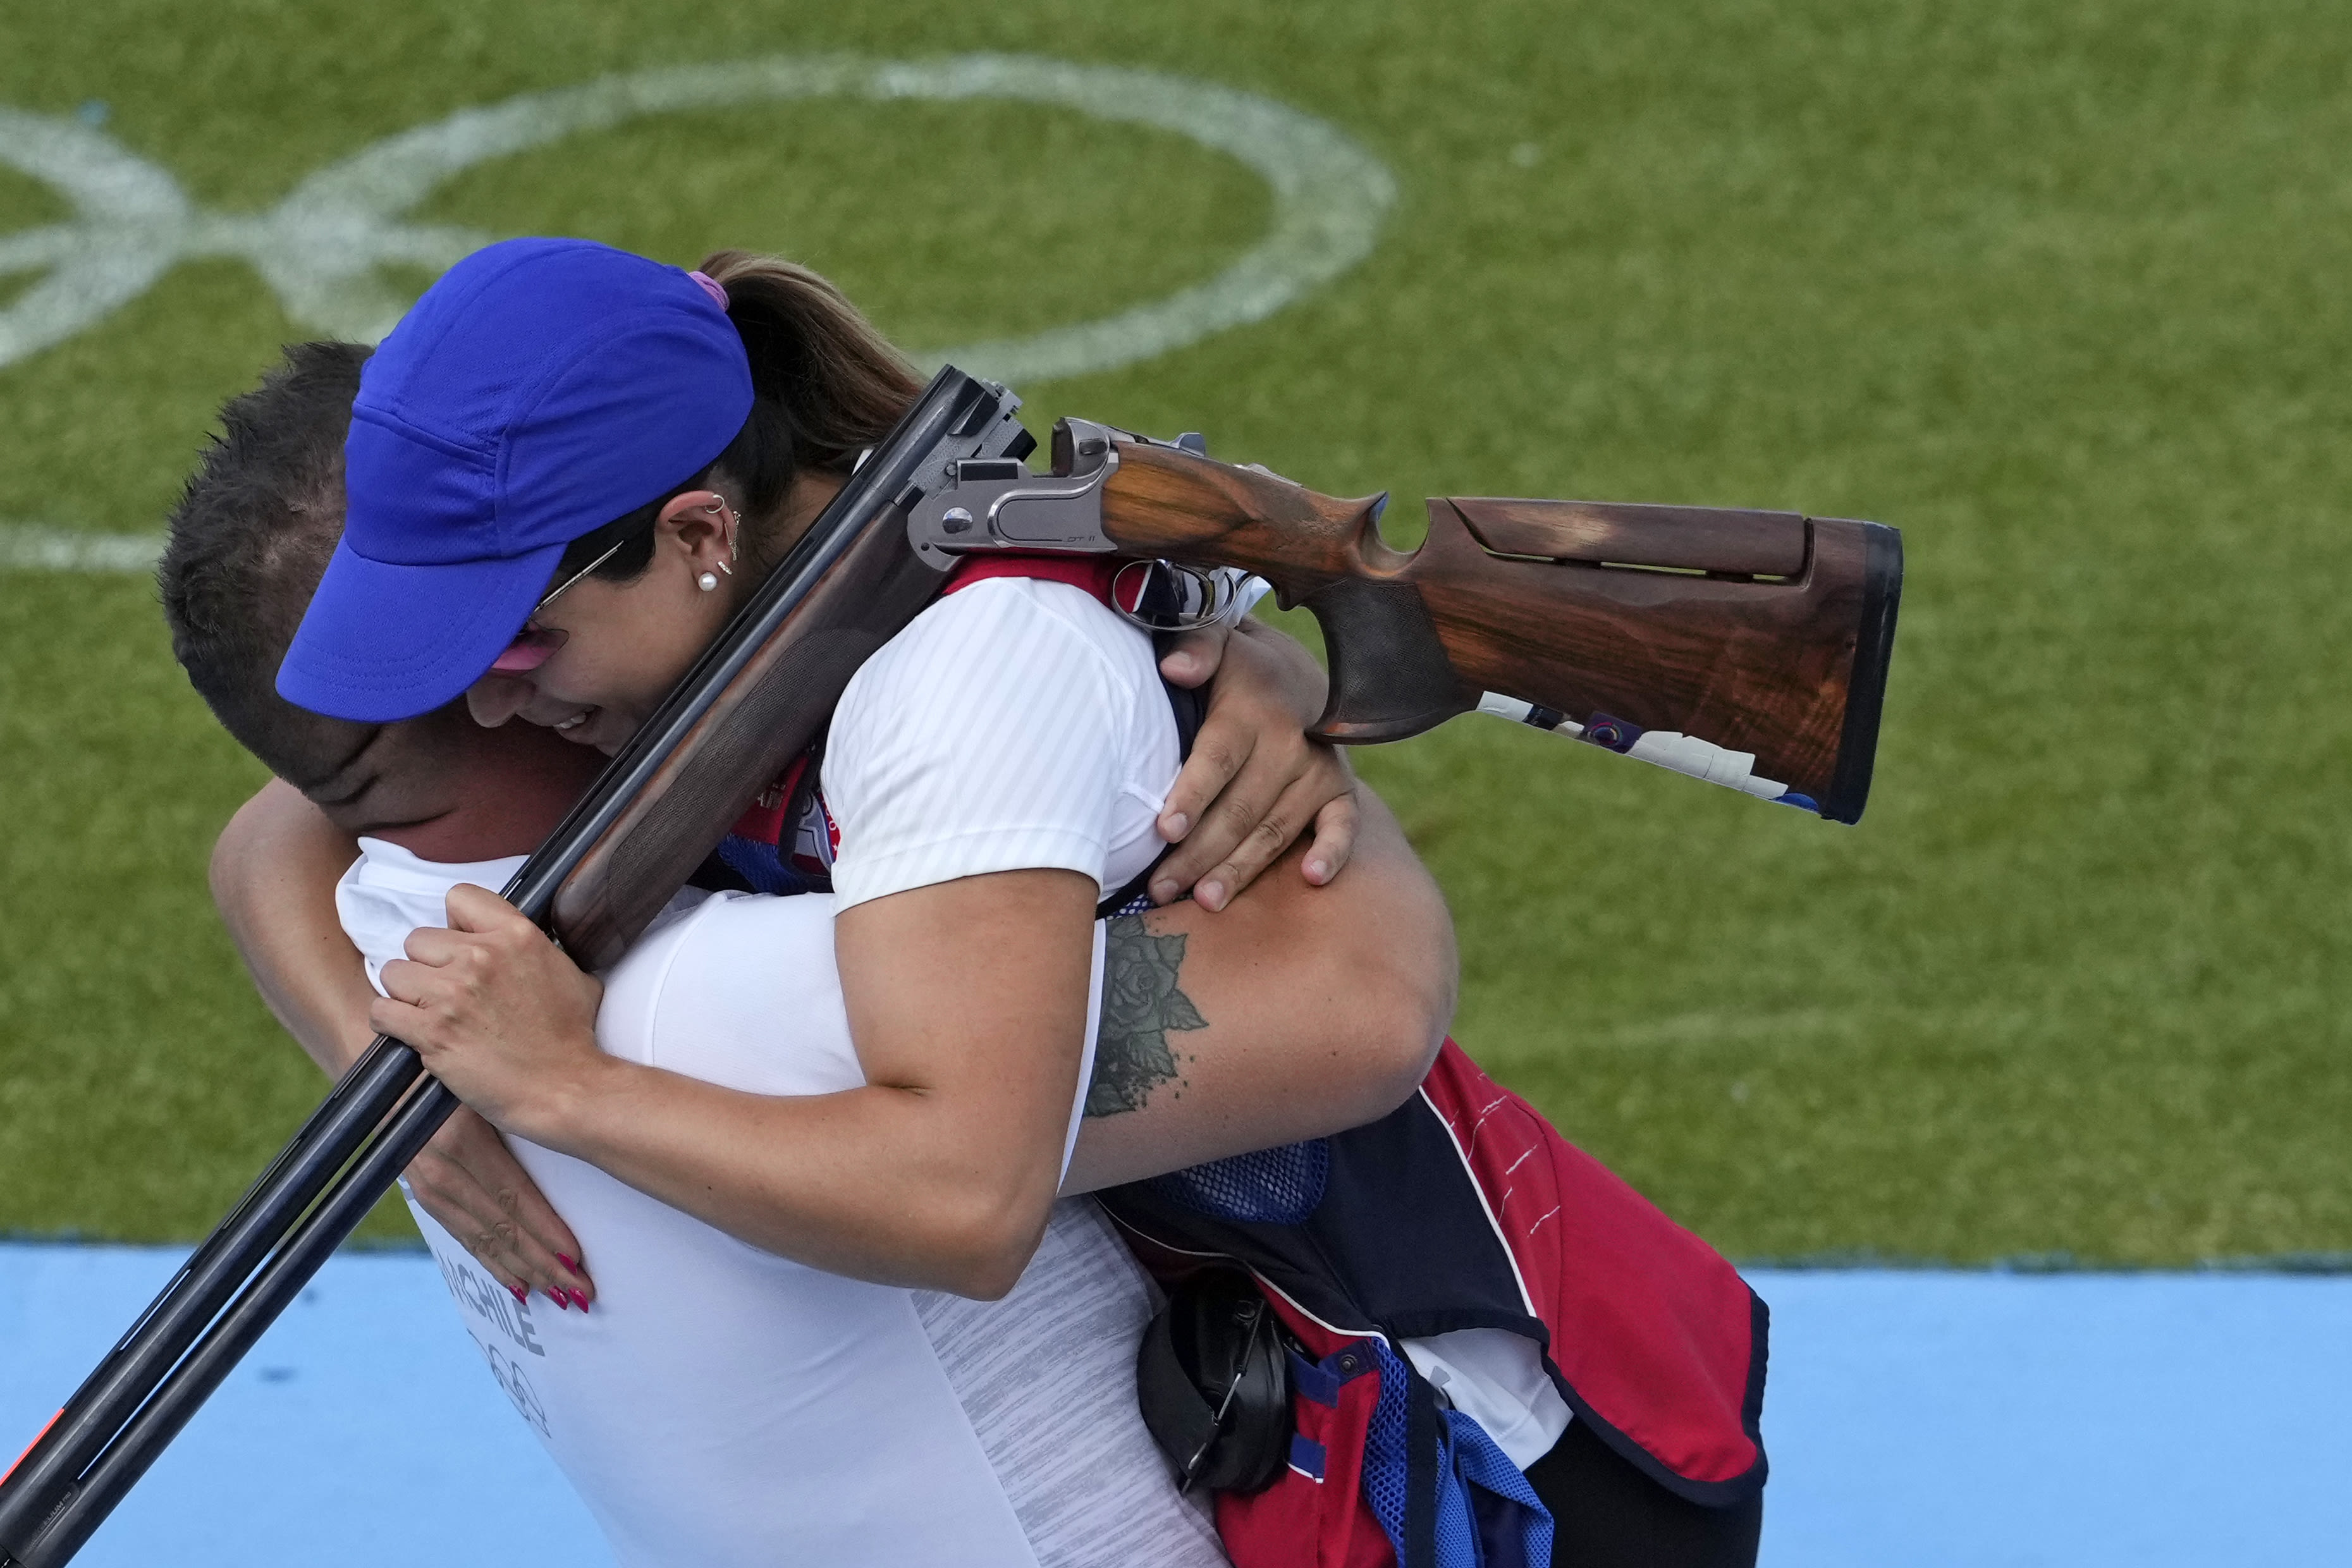 Chile gets its first Olympic gold in 20 years as Francisca Crovetto wins women's skeet shooting